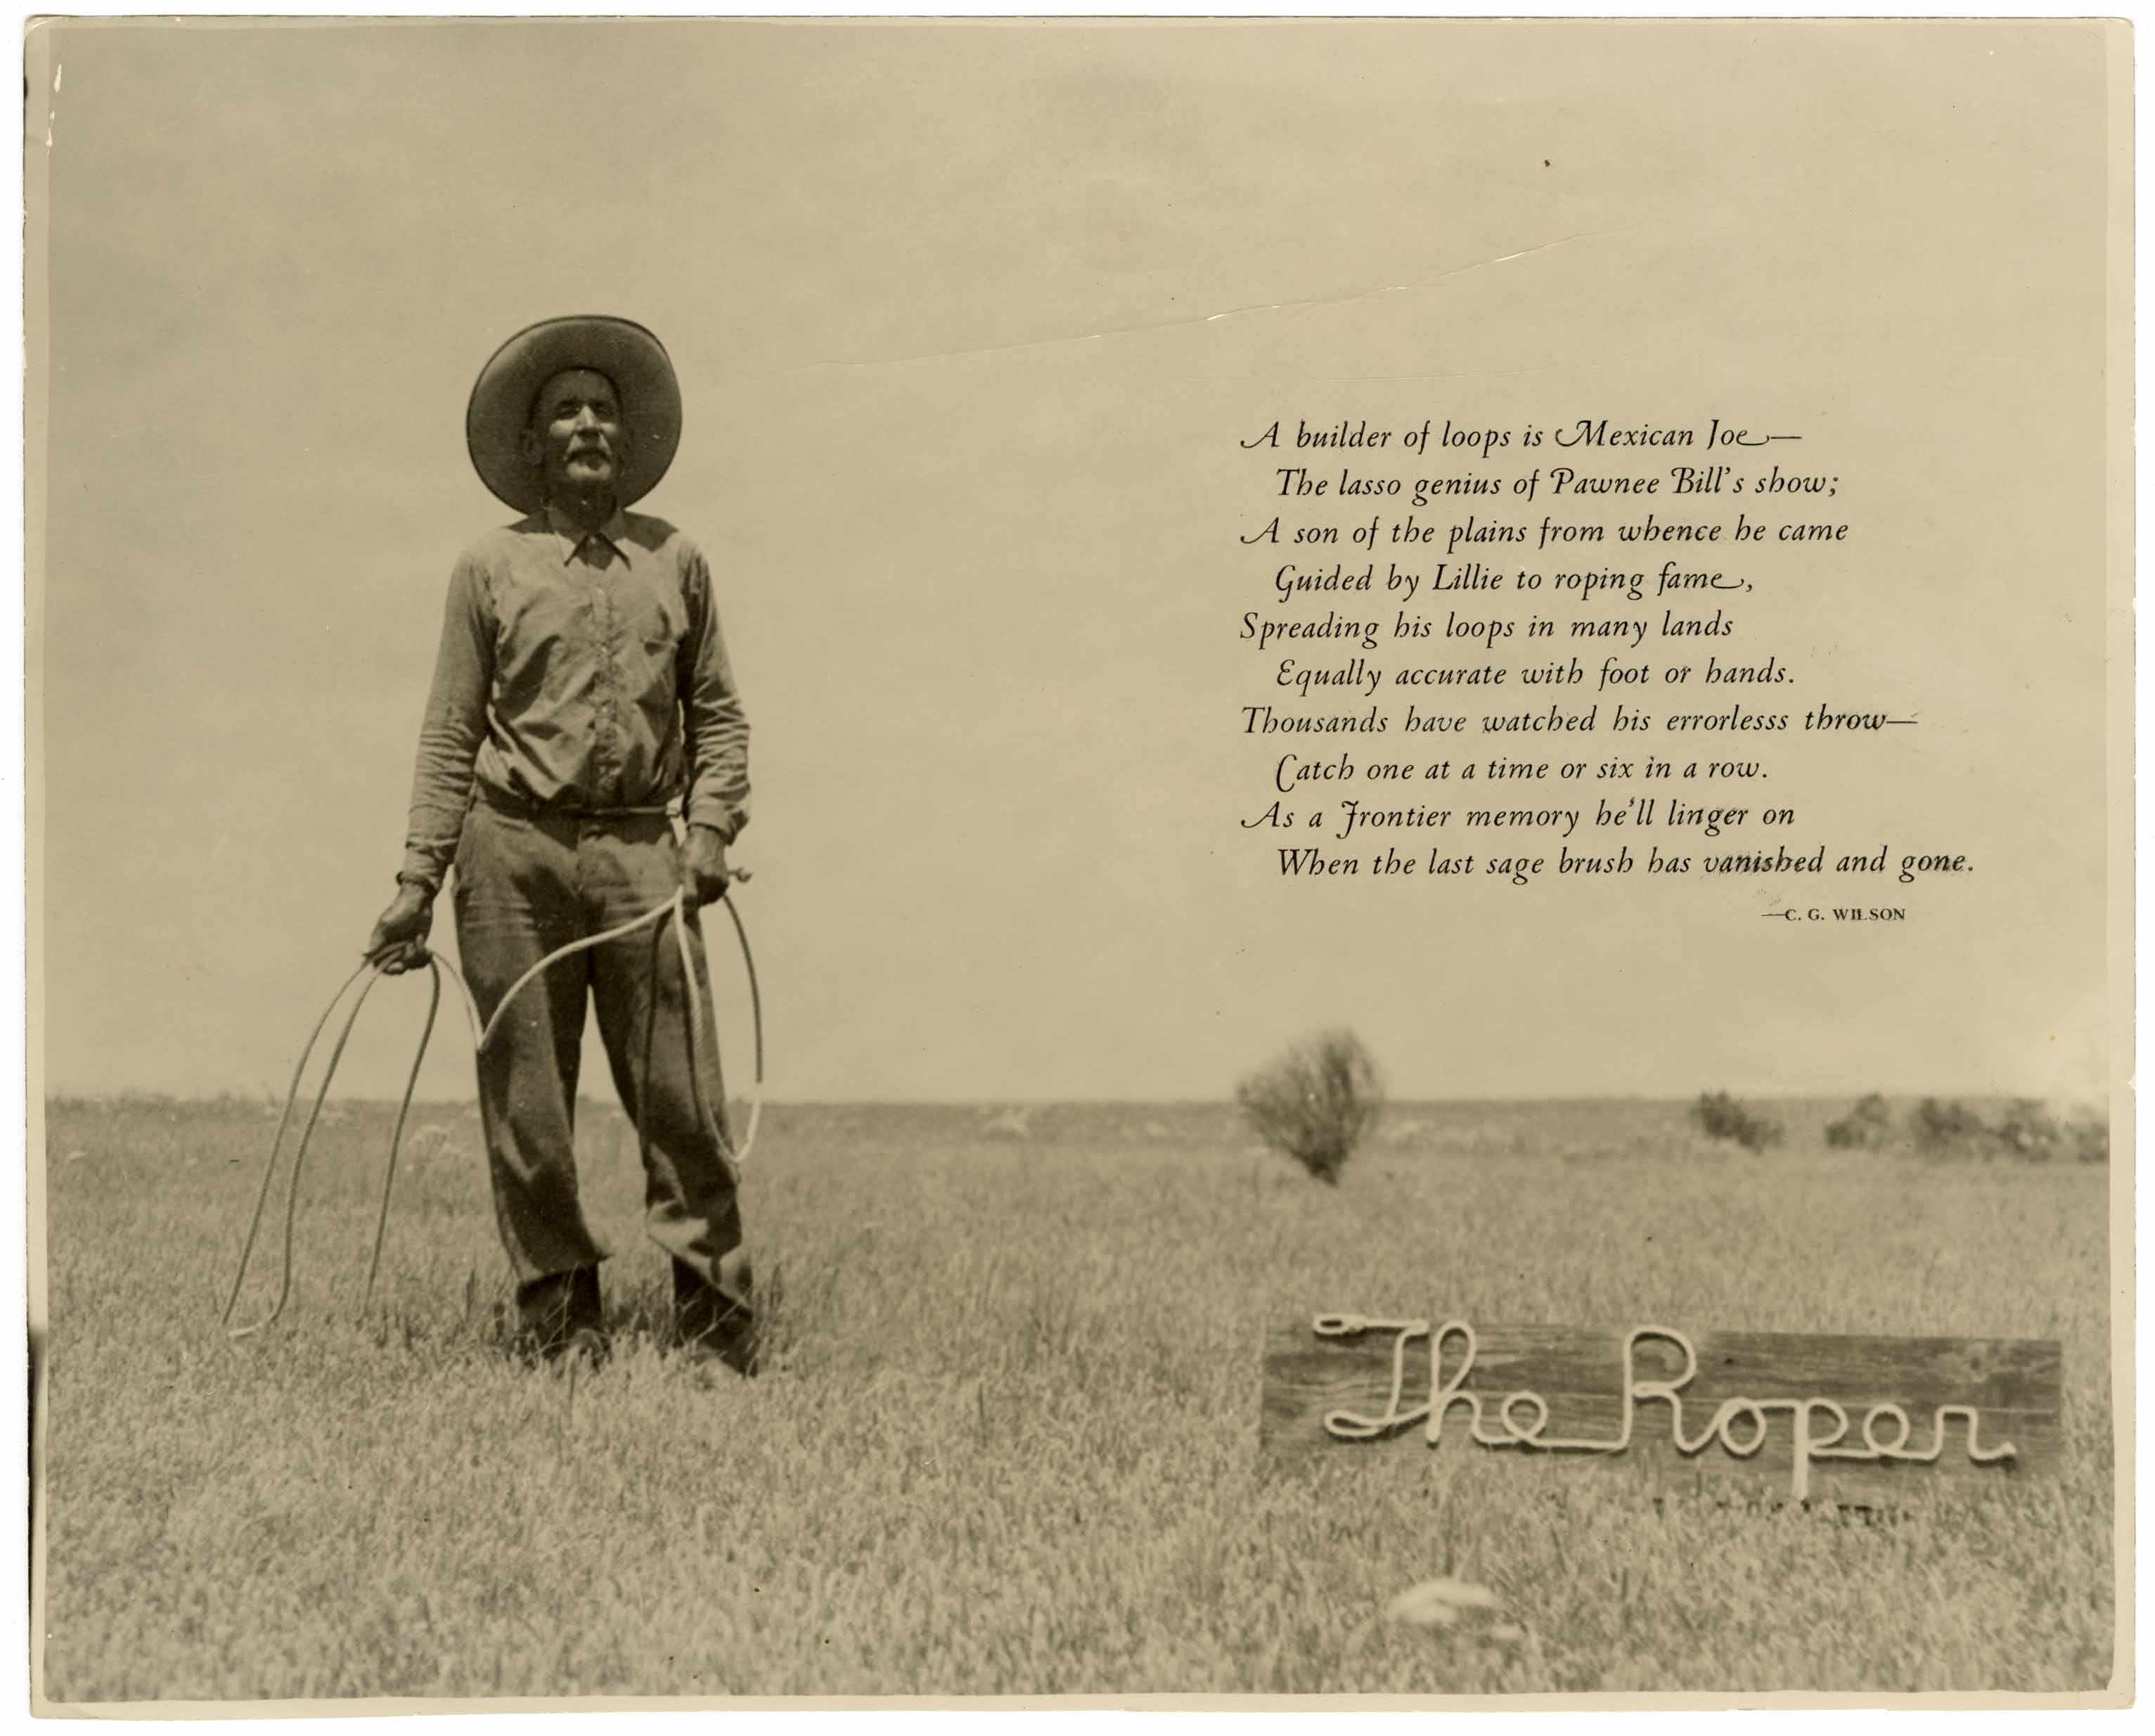 The Roper [and poem about Mexican Joe by C. G. Wilson]